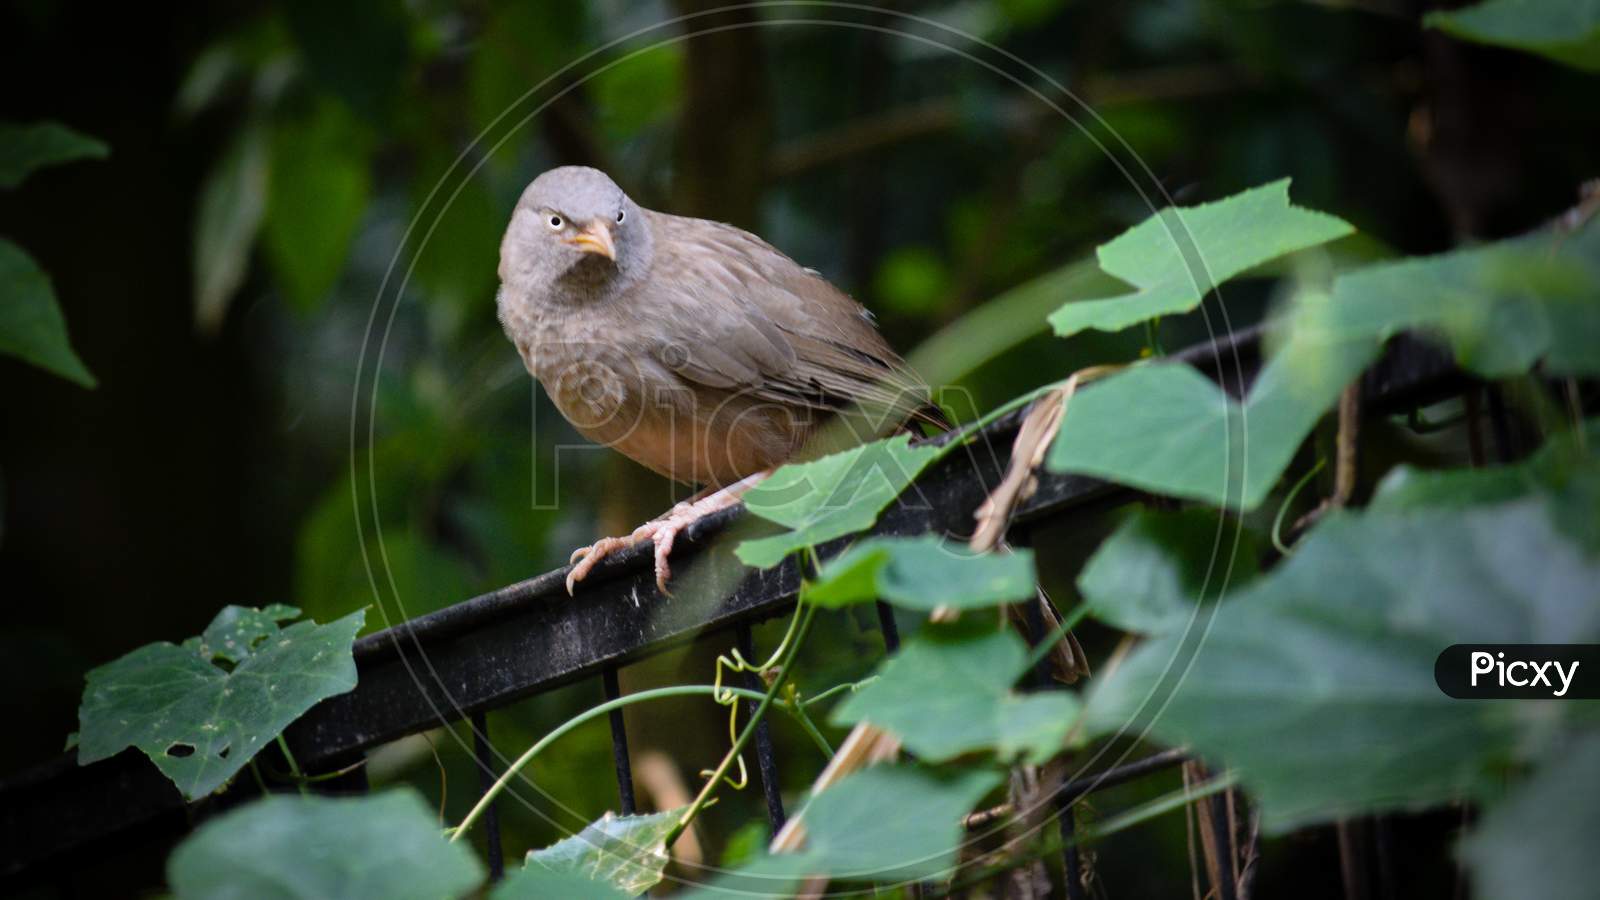 Grey bird is standing on a fence looking very attractive during summer